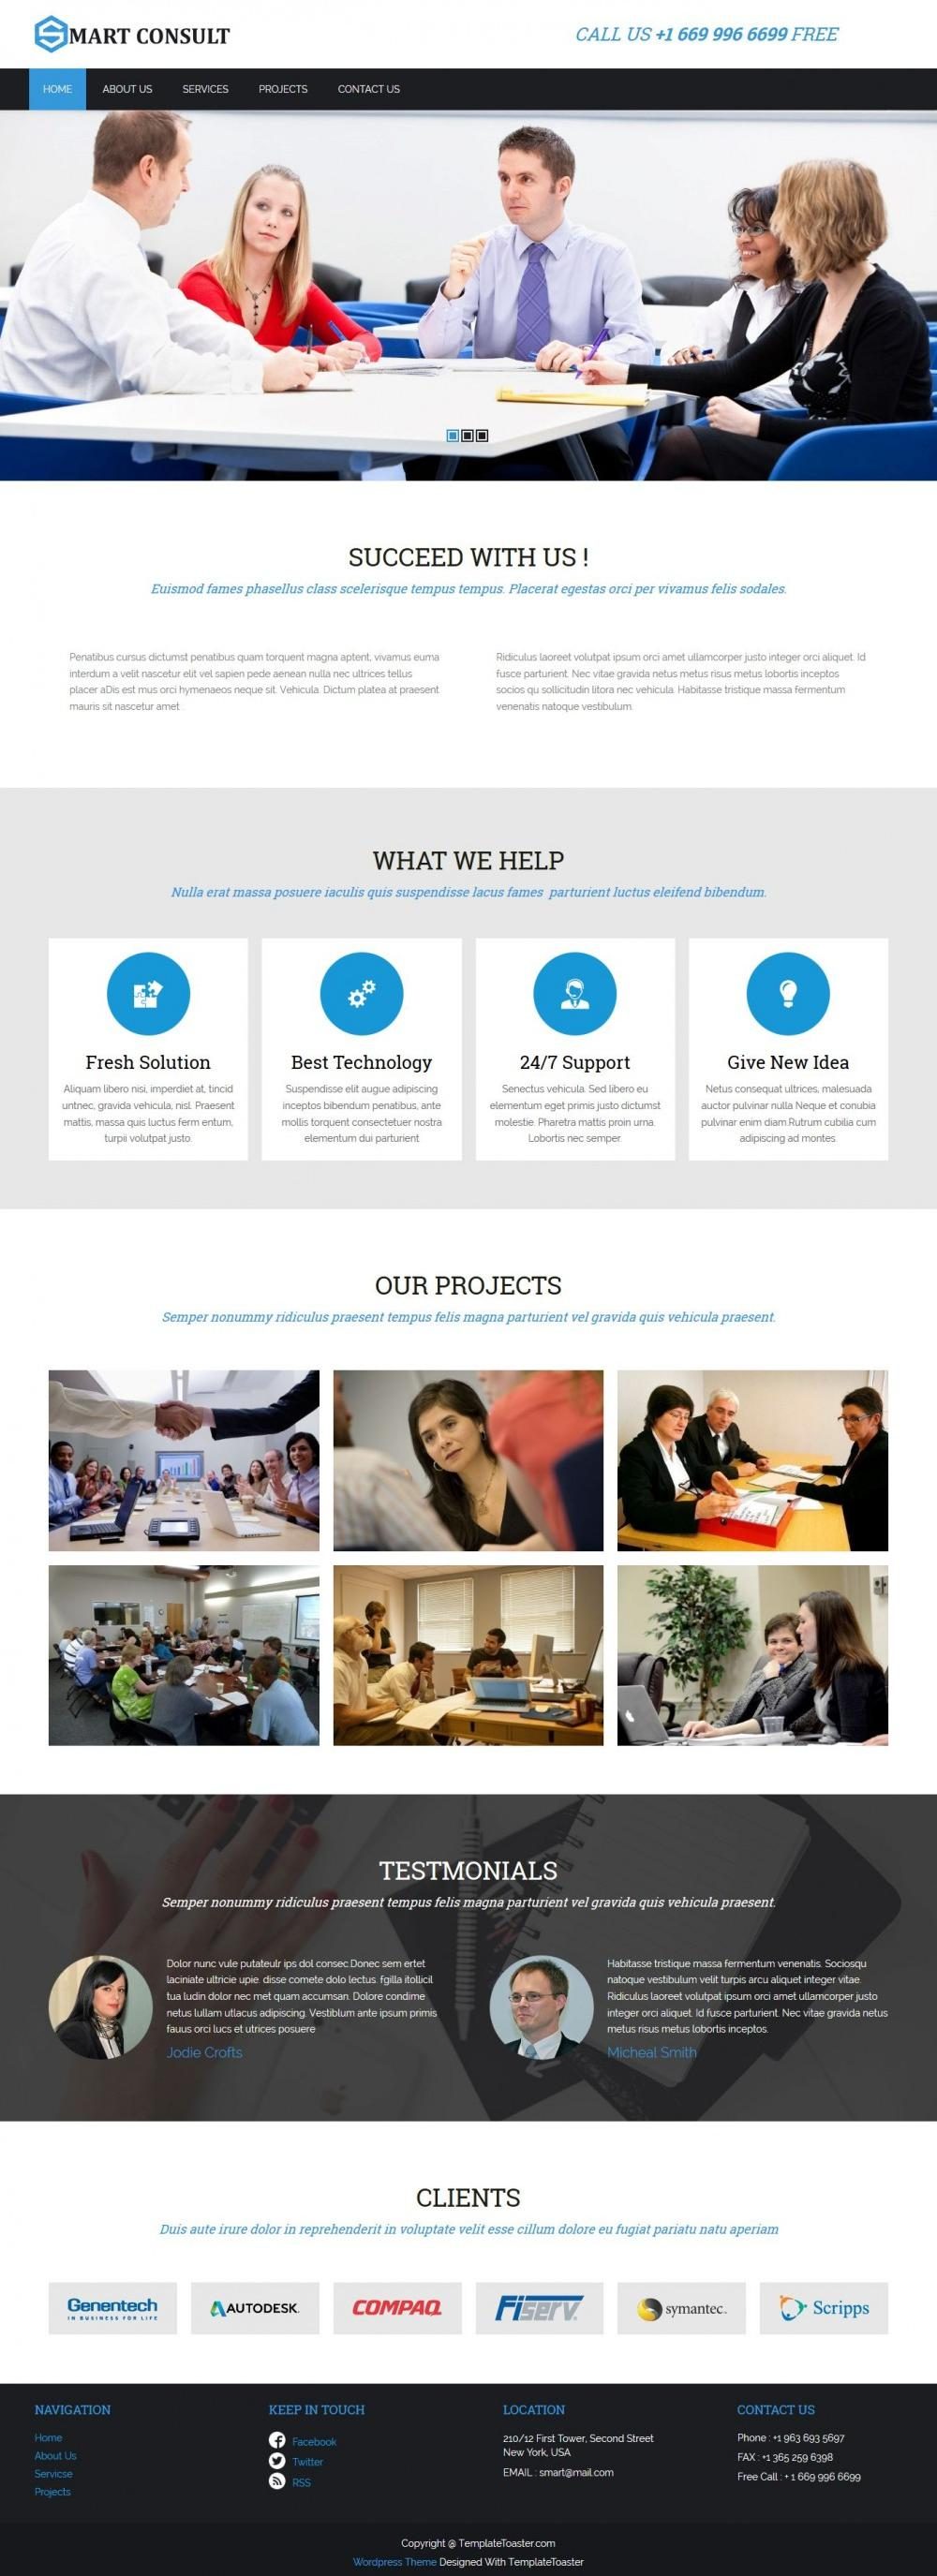 smart consultant business marketing services blogger template